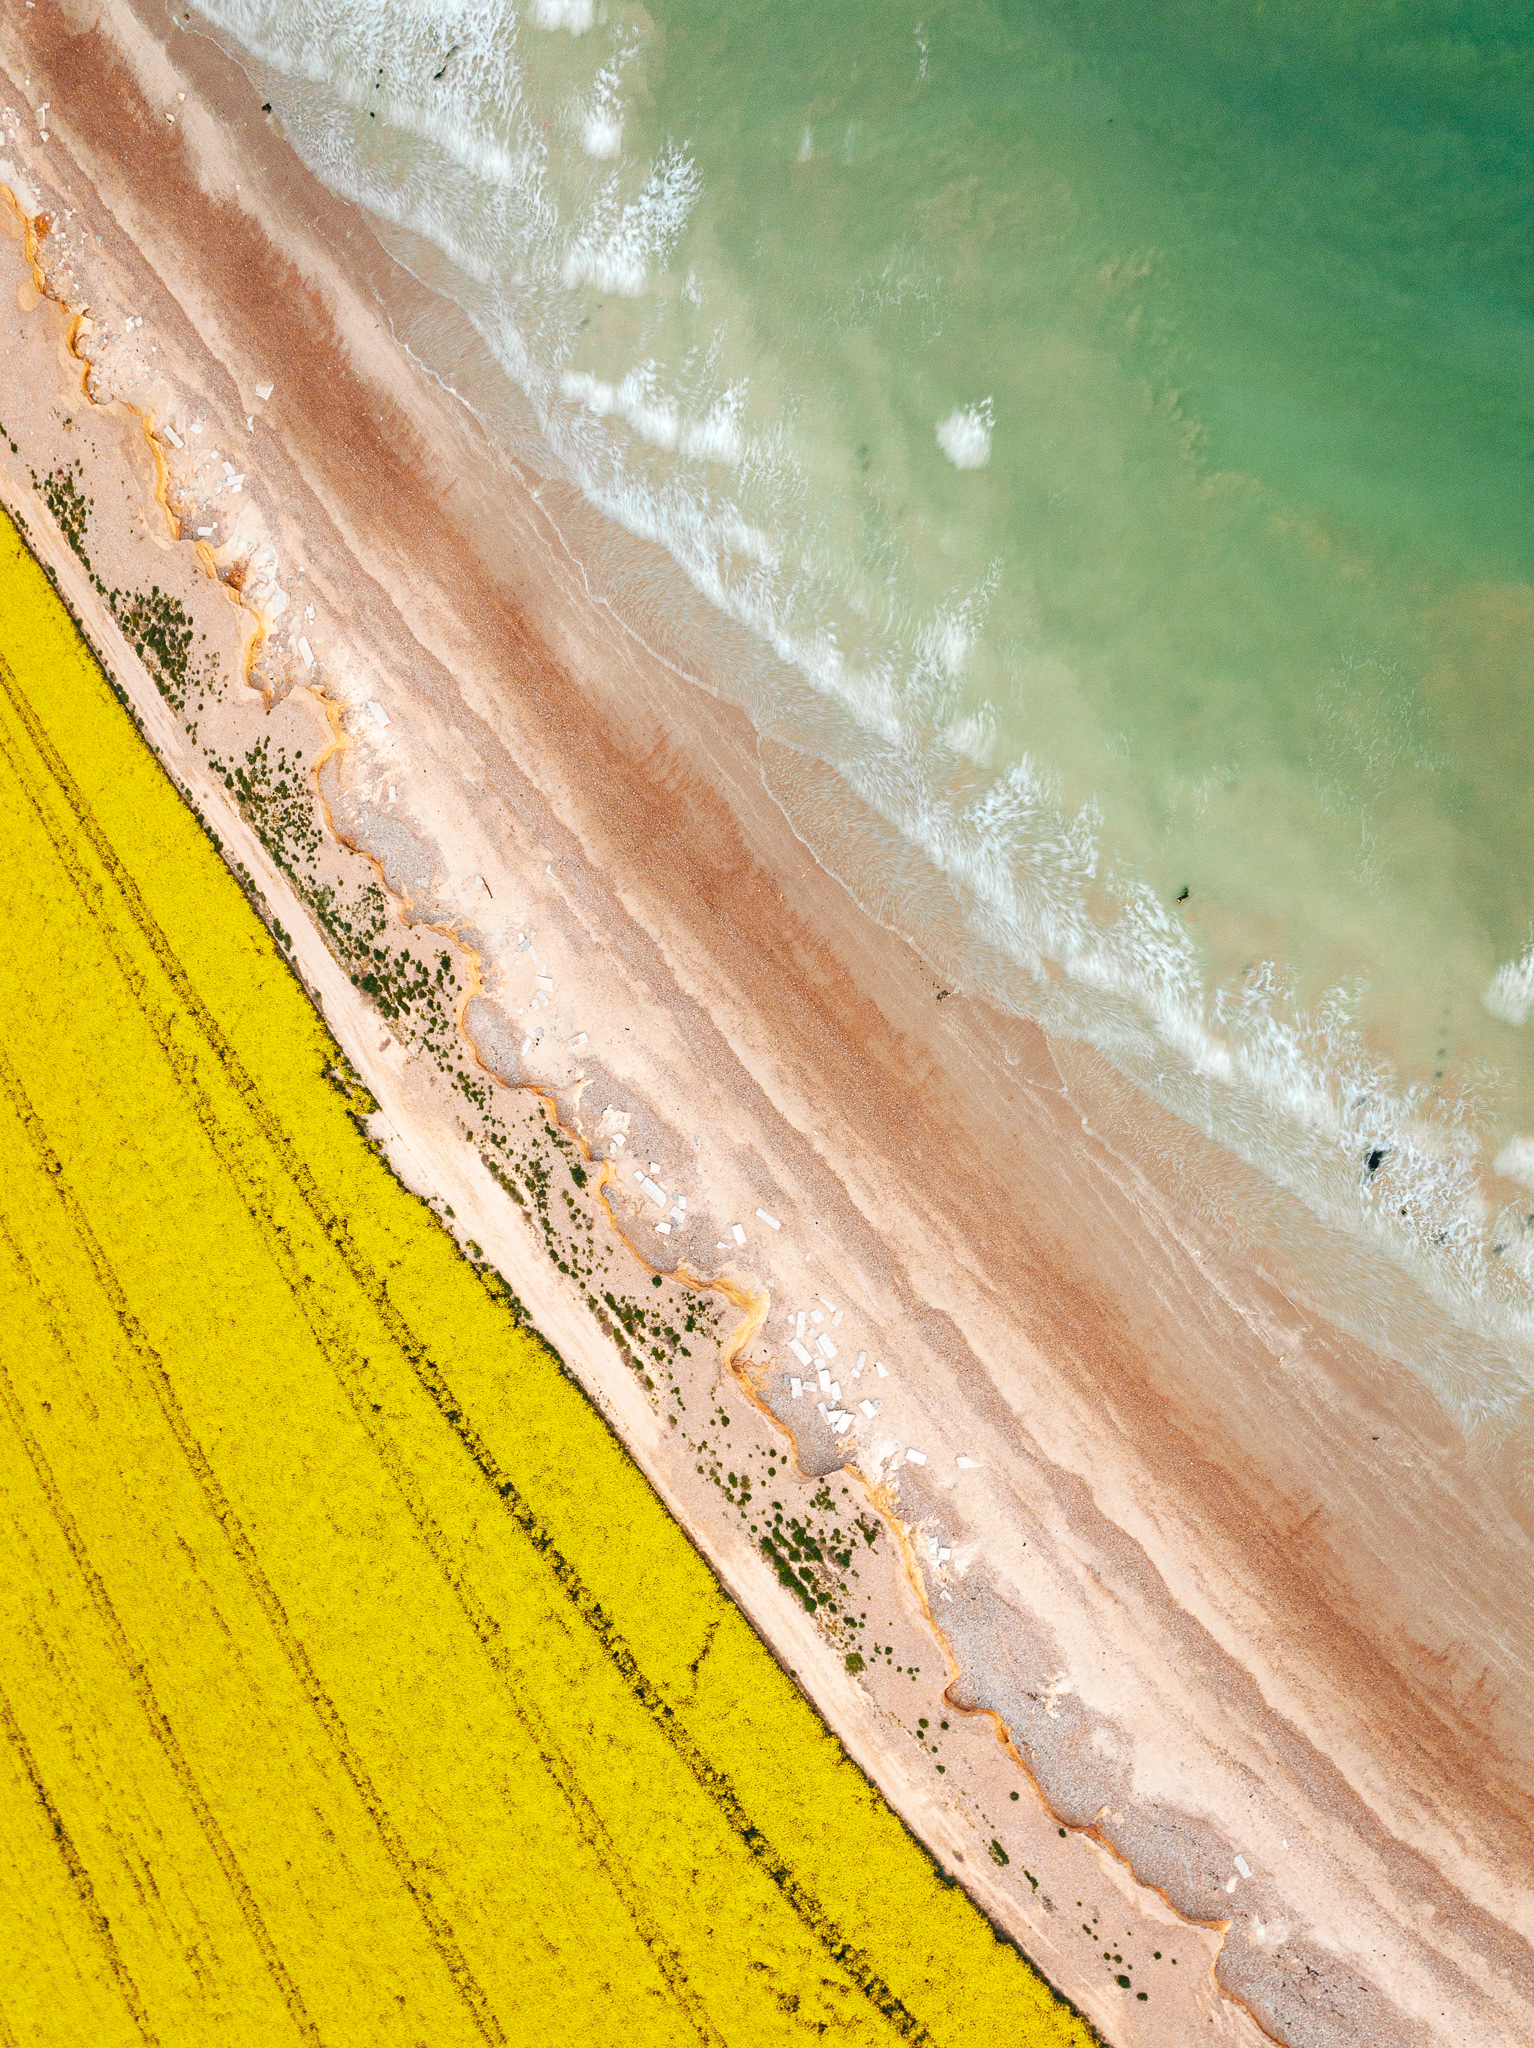 Yellow rapeseed field in full bloom by the beach with waves gentry rolling on the shore